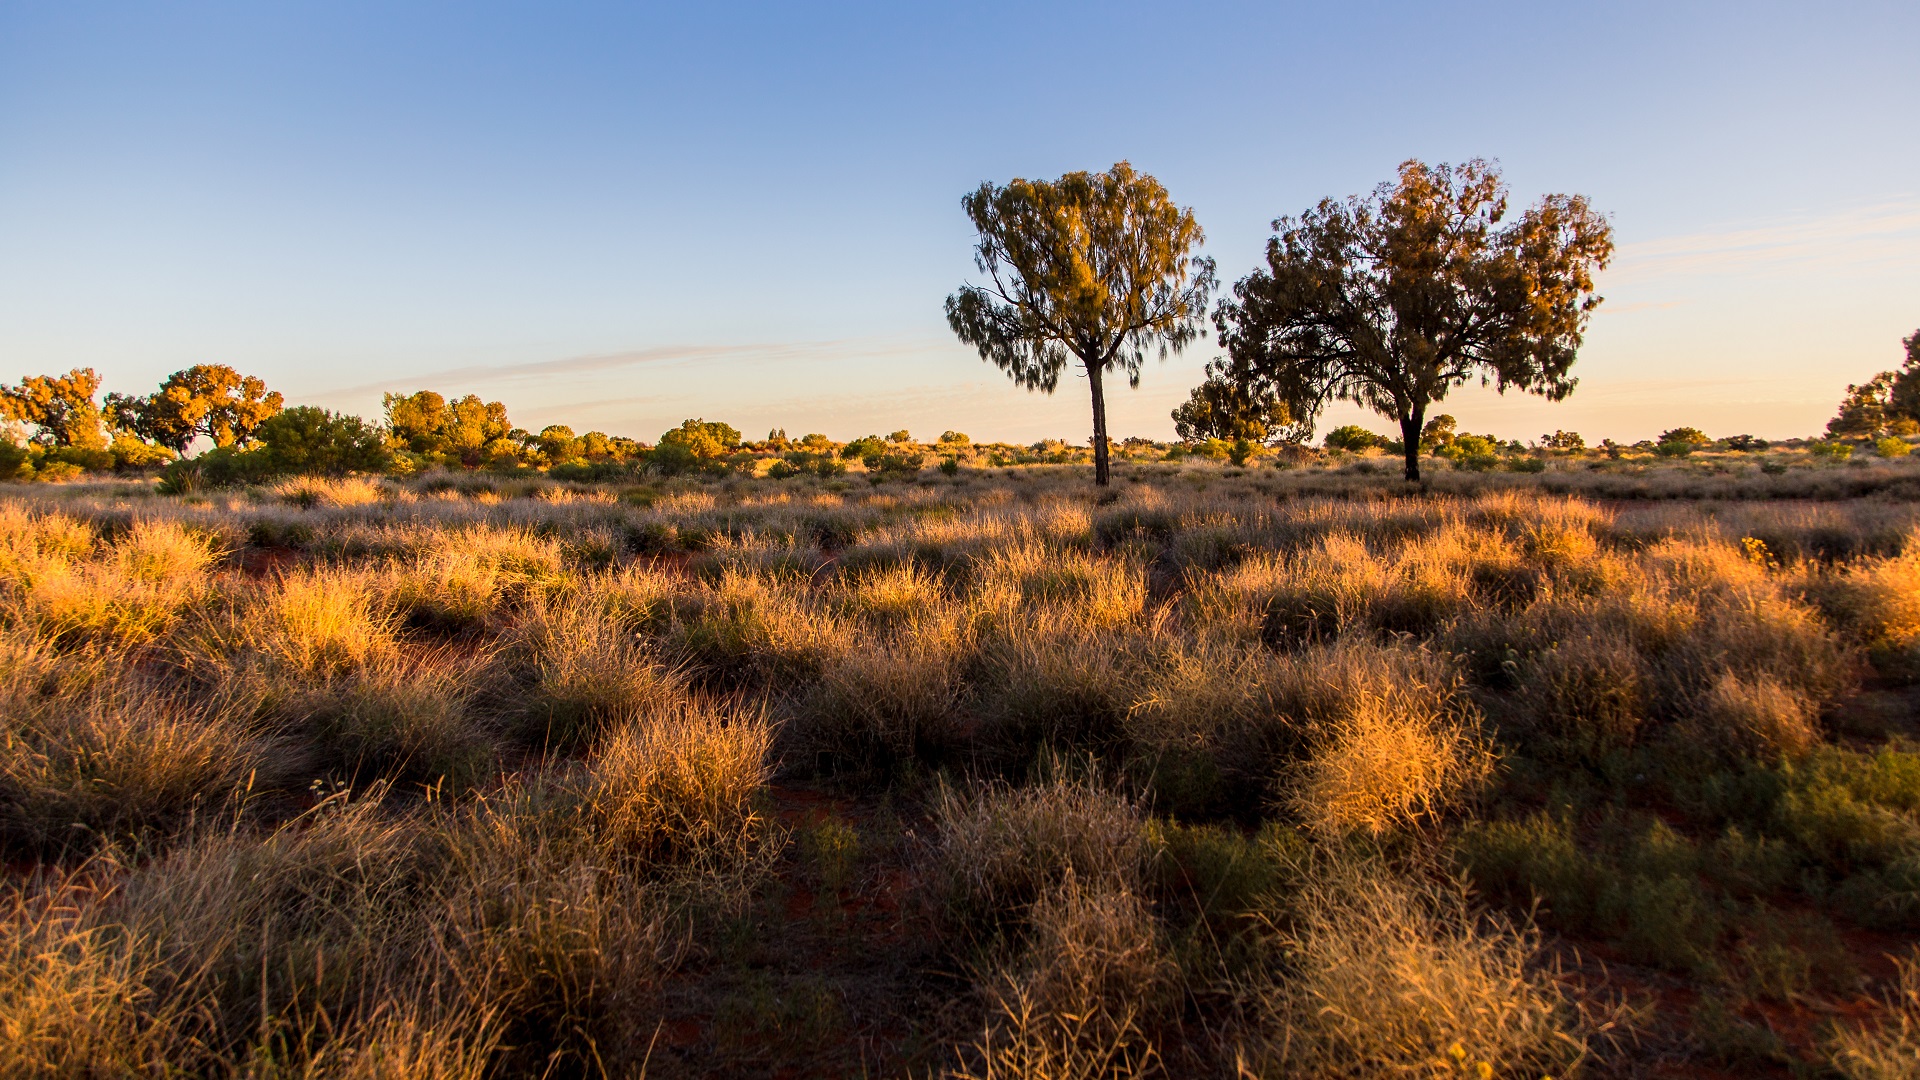 Land Restoration Fund Update: New funding announced for Queensland carbon farming projects to mitigate climate change